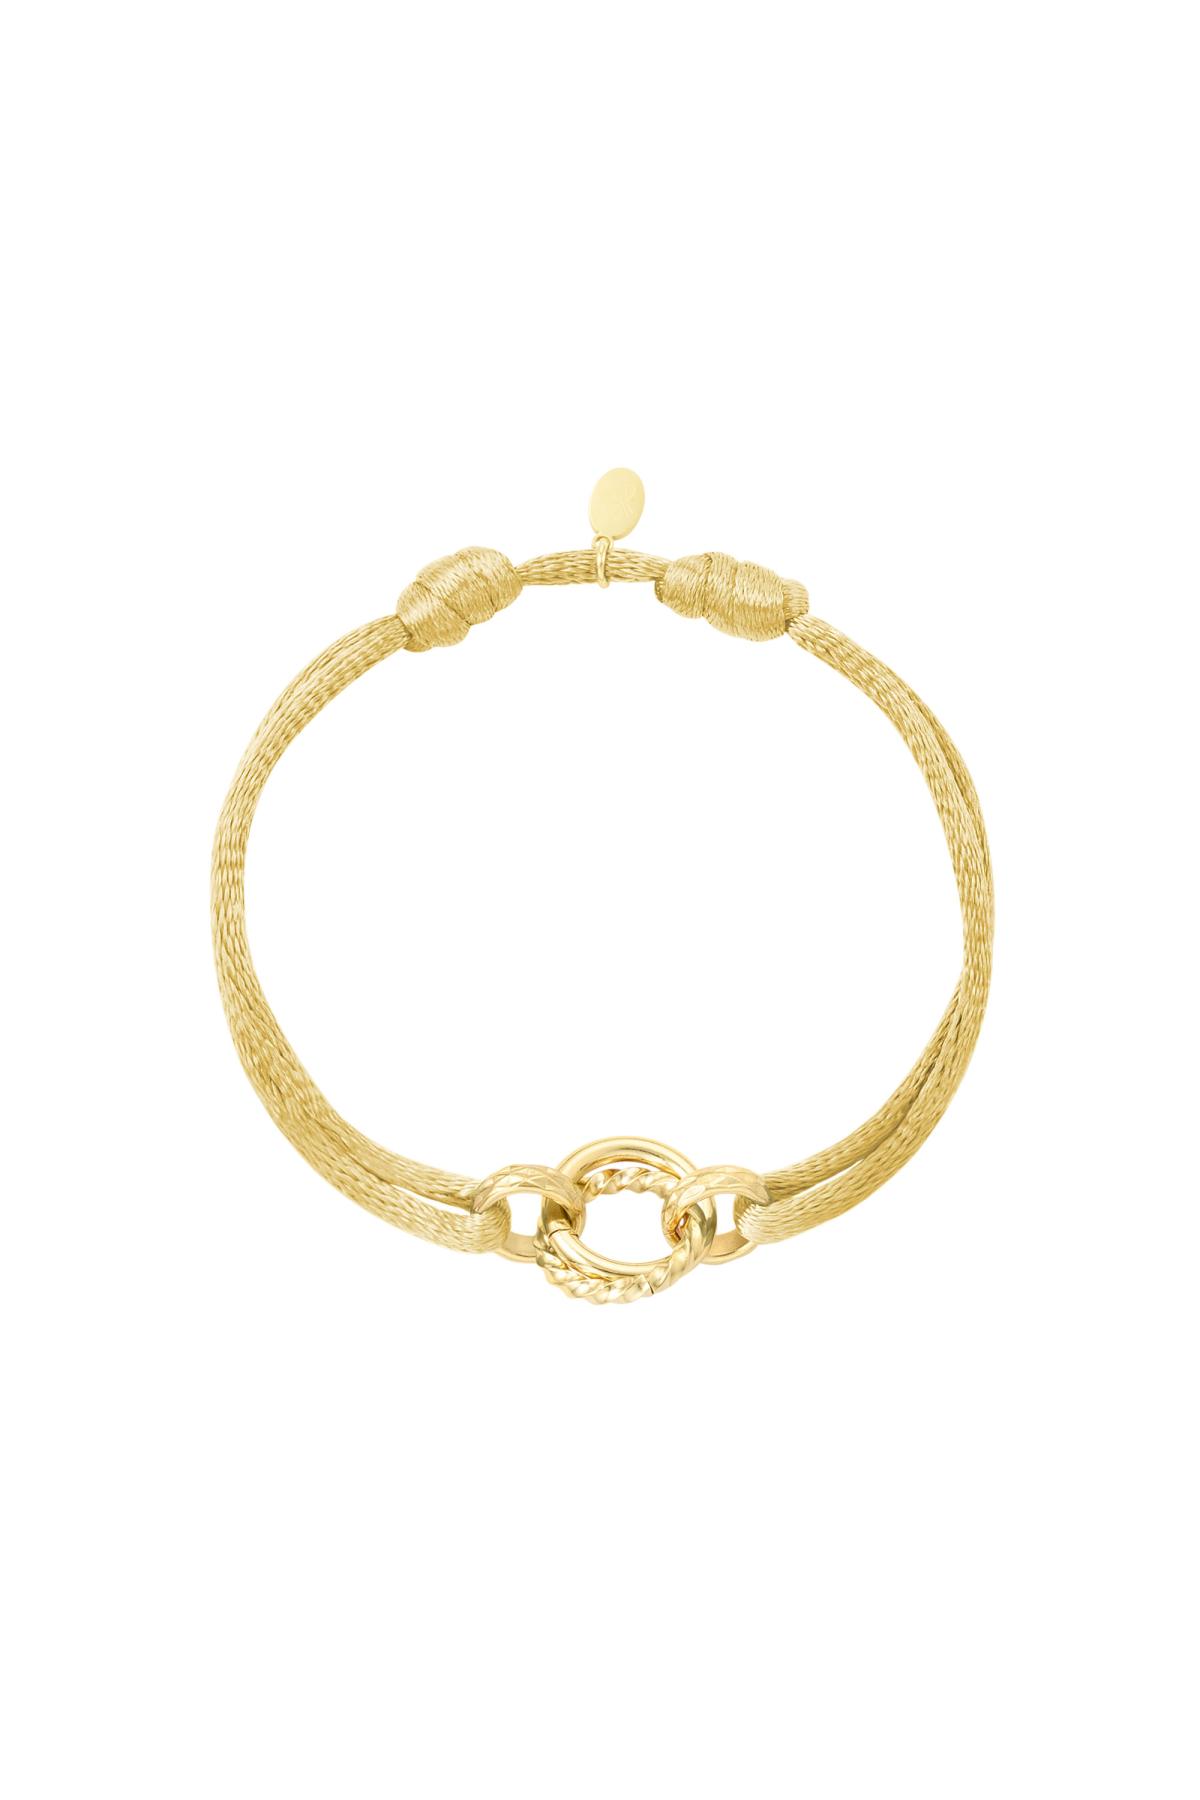 Fabric bracelet circle Champagne Stainless Steel h5 